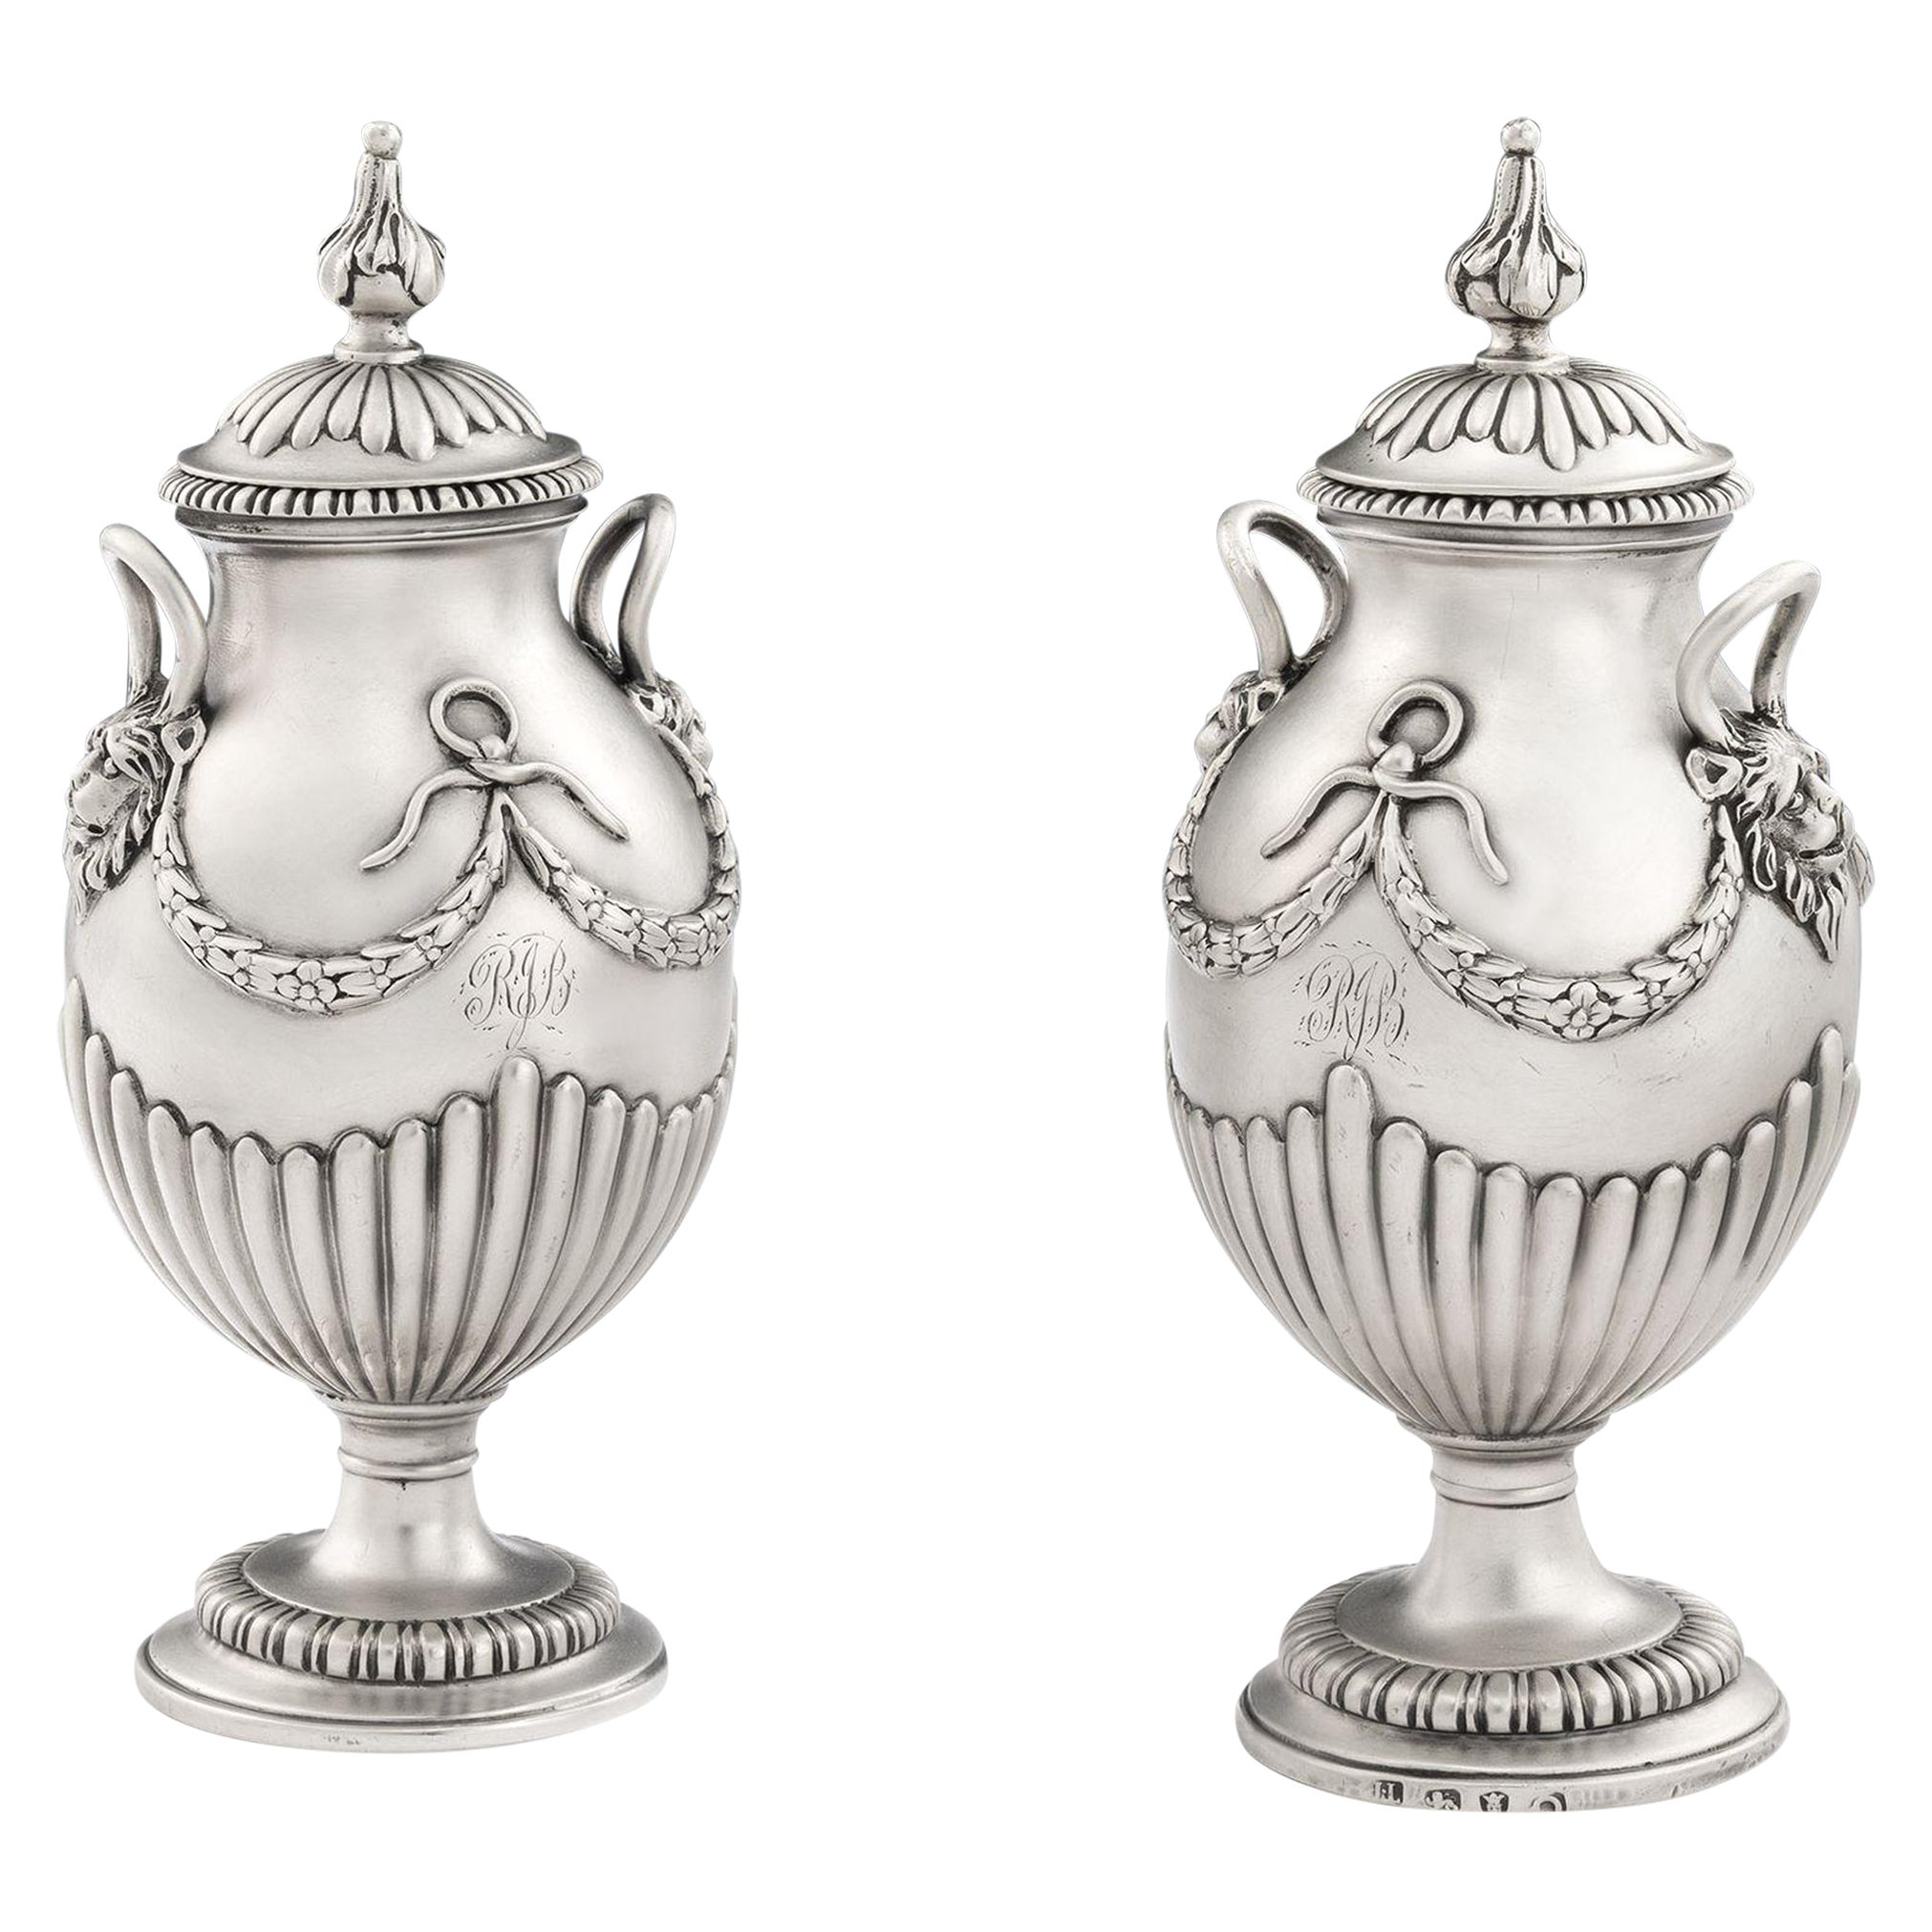 Pair of George III Neo Classical Vases by Thomas Pitts I, 1771 For Sale